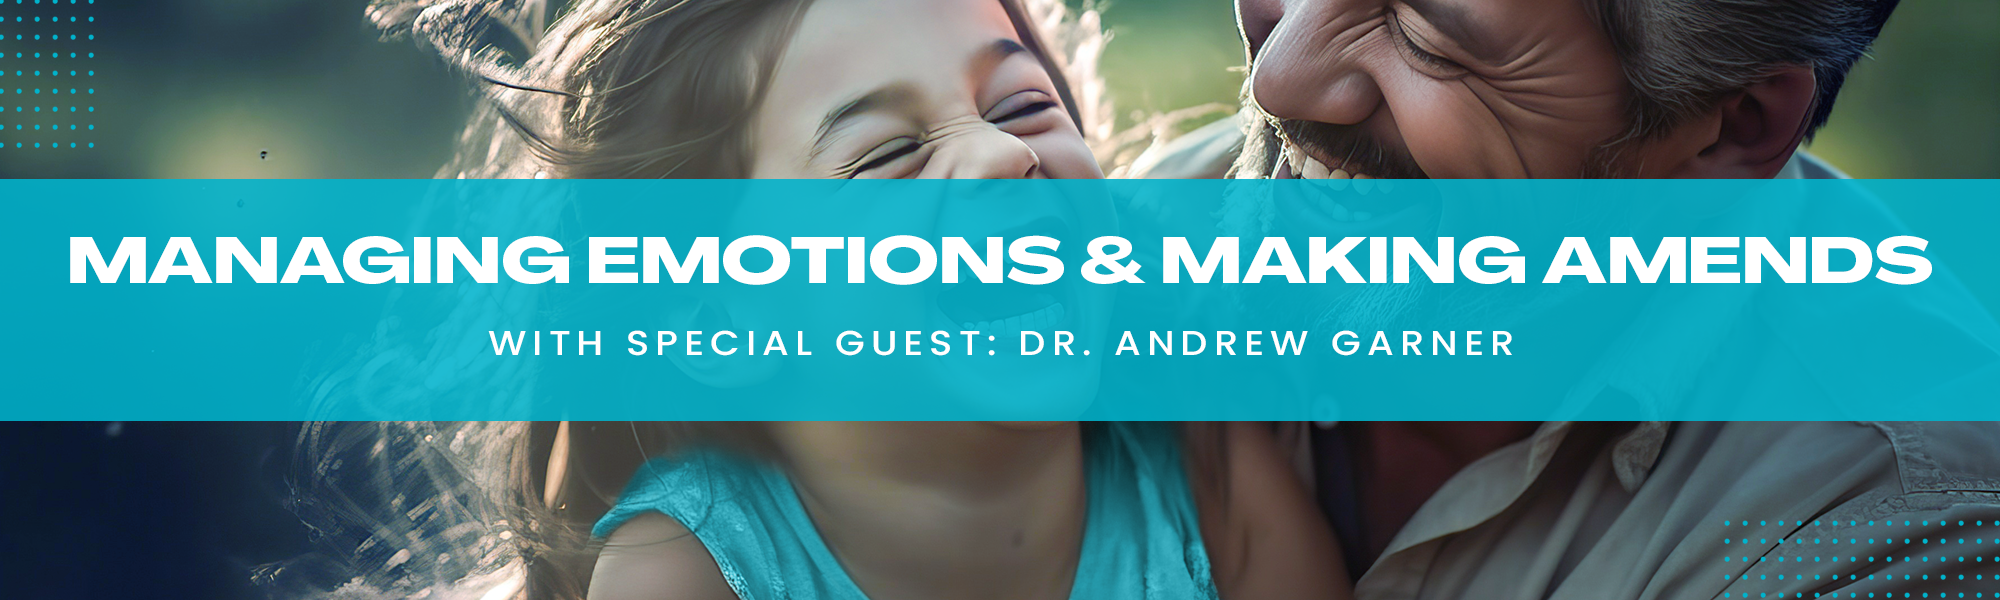 Emotion regulation. A father and daughter laugh together.